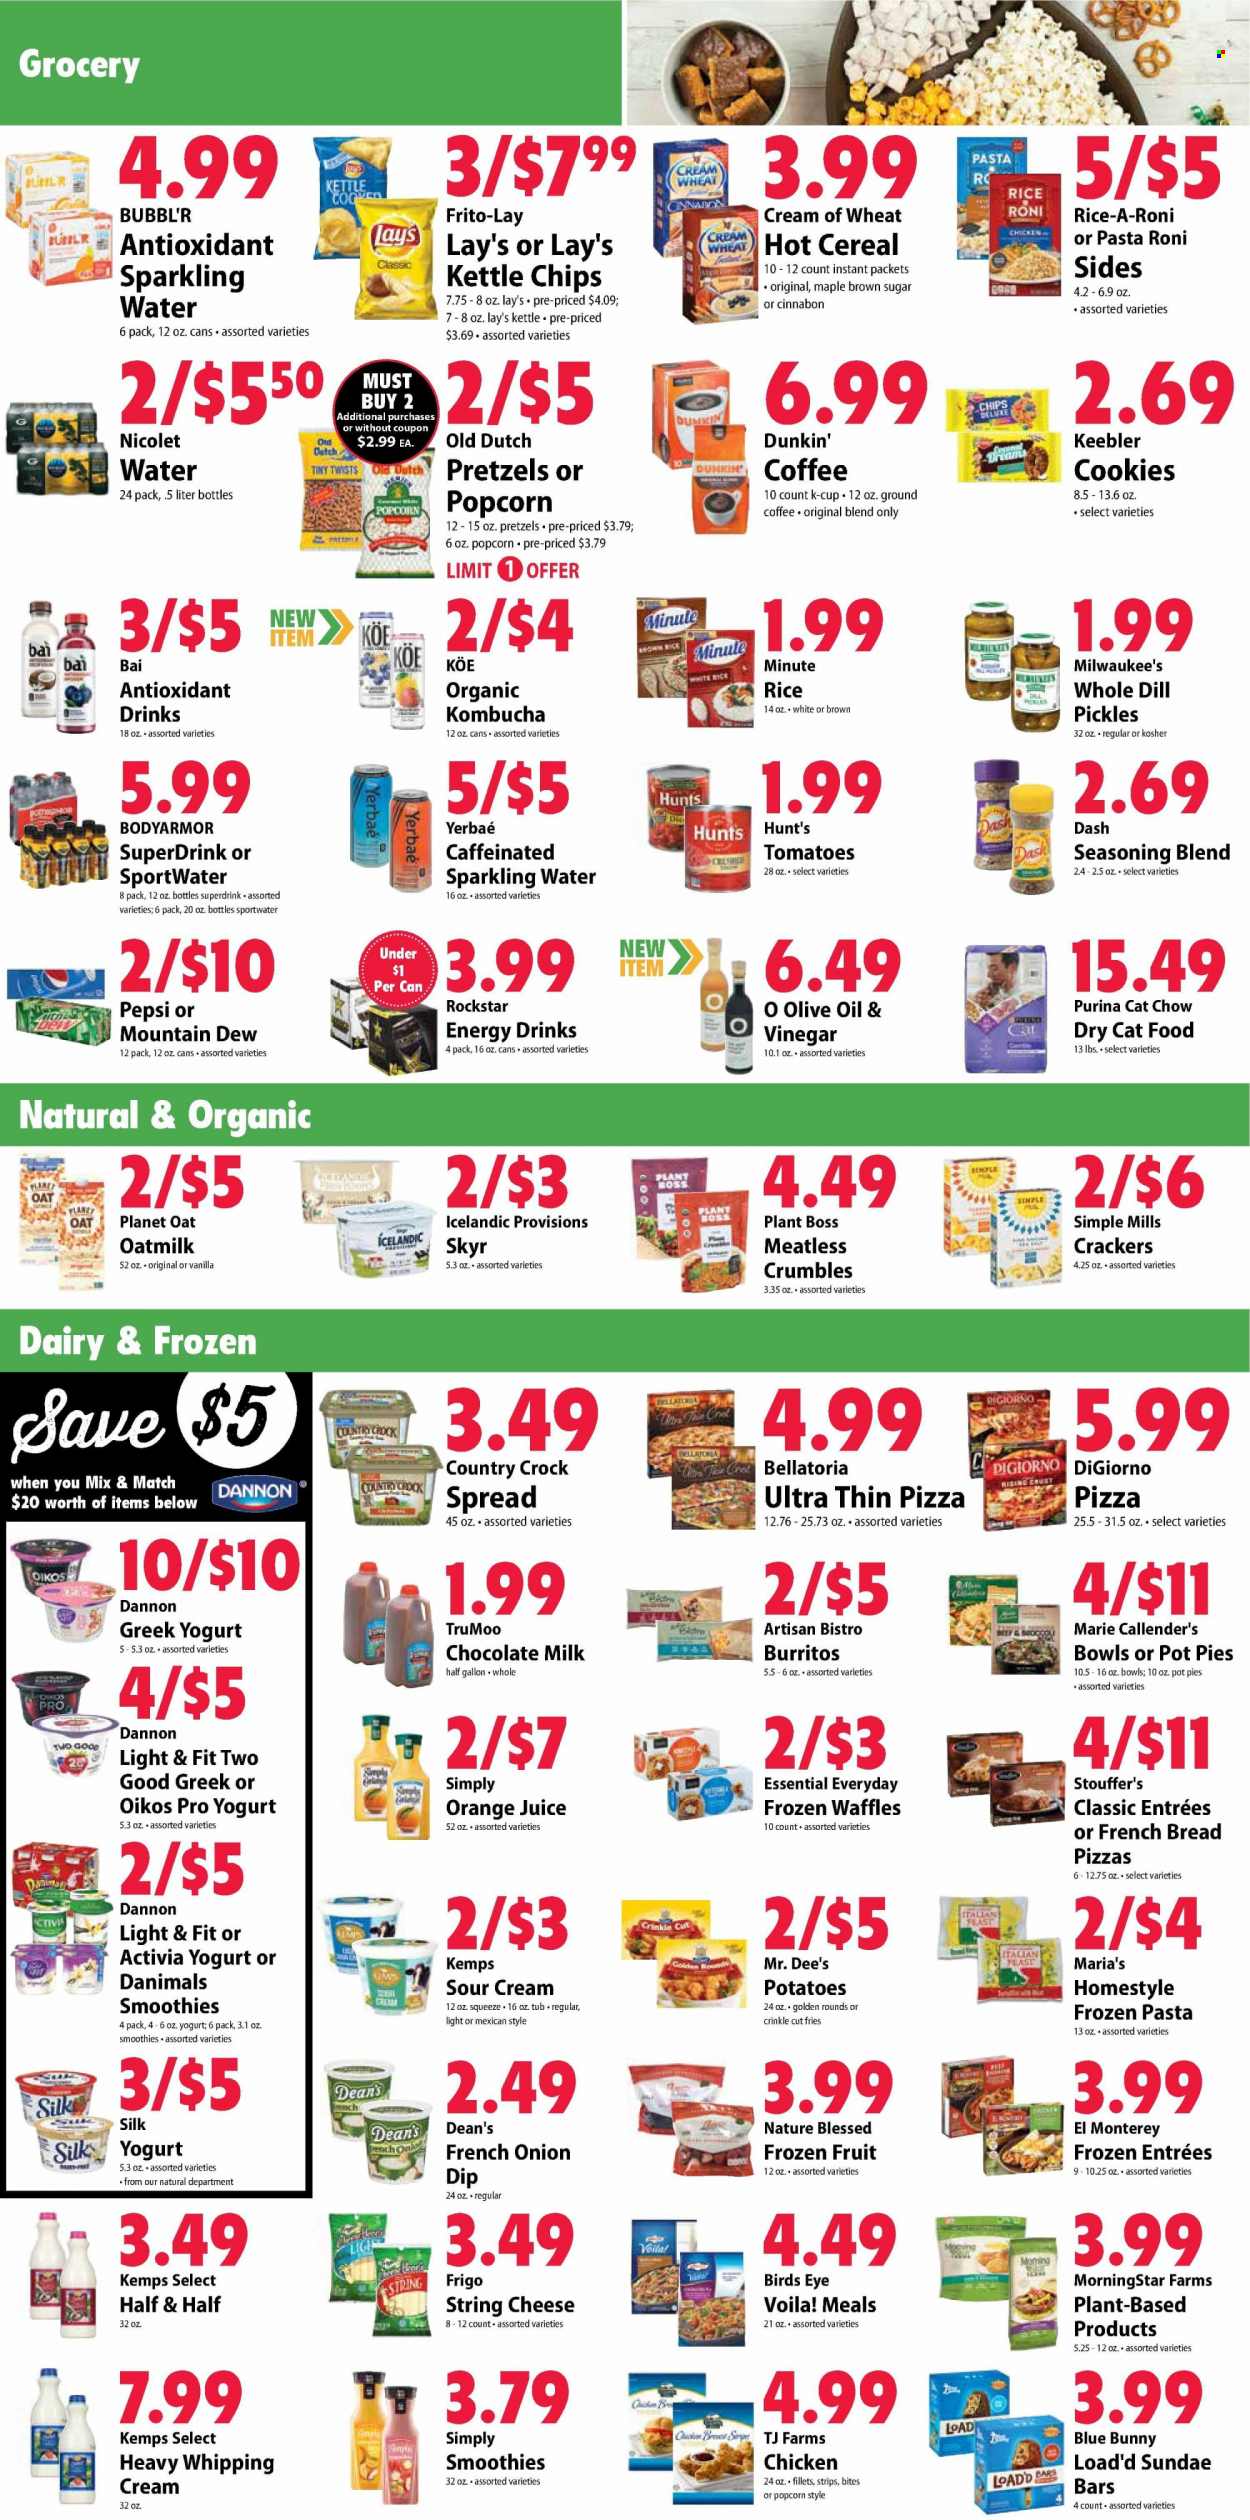 thumbnail - Festival Foods Flyer - 01/19/2022 - 01/25/2022 - Sales products - bread, pretzels, french bread, pot pie, waffles, potatoes, onion, pizza, Bird's Eye, burrito, MorningStar Farms, Marie Callender's, string cheese, Kemps, greek yoghurt, yoghurt, Activia, Oikos, Dannon, Danimals, milk, Silk, oat milk, sour cream, whipping cream, dip, Blue Bunny, strips, Stouffer's, potato fries, Bellatoria, cookies, milk chocolate, chocolate, crackers, Keebler, Lay’s, popcorn, Frito-Lay, cane sugar, oats, pickles, cereals, Cream of Wheat, rice, dill, spice, olive oil, oil, Mountain Dew, Pepsi, orange juice, juice, energy drink, Bai, Rockstar, smoothie, sparkling water, kombucha, coffee, ground coffee, coffee capsules, K-Cups, Half and half. Page 3.